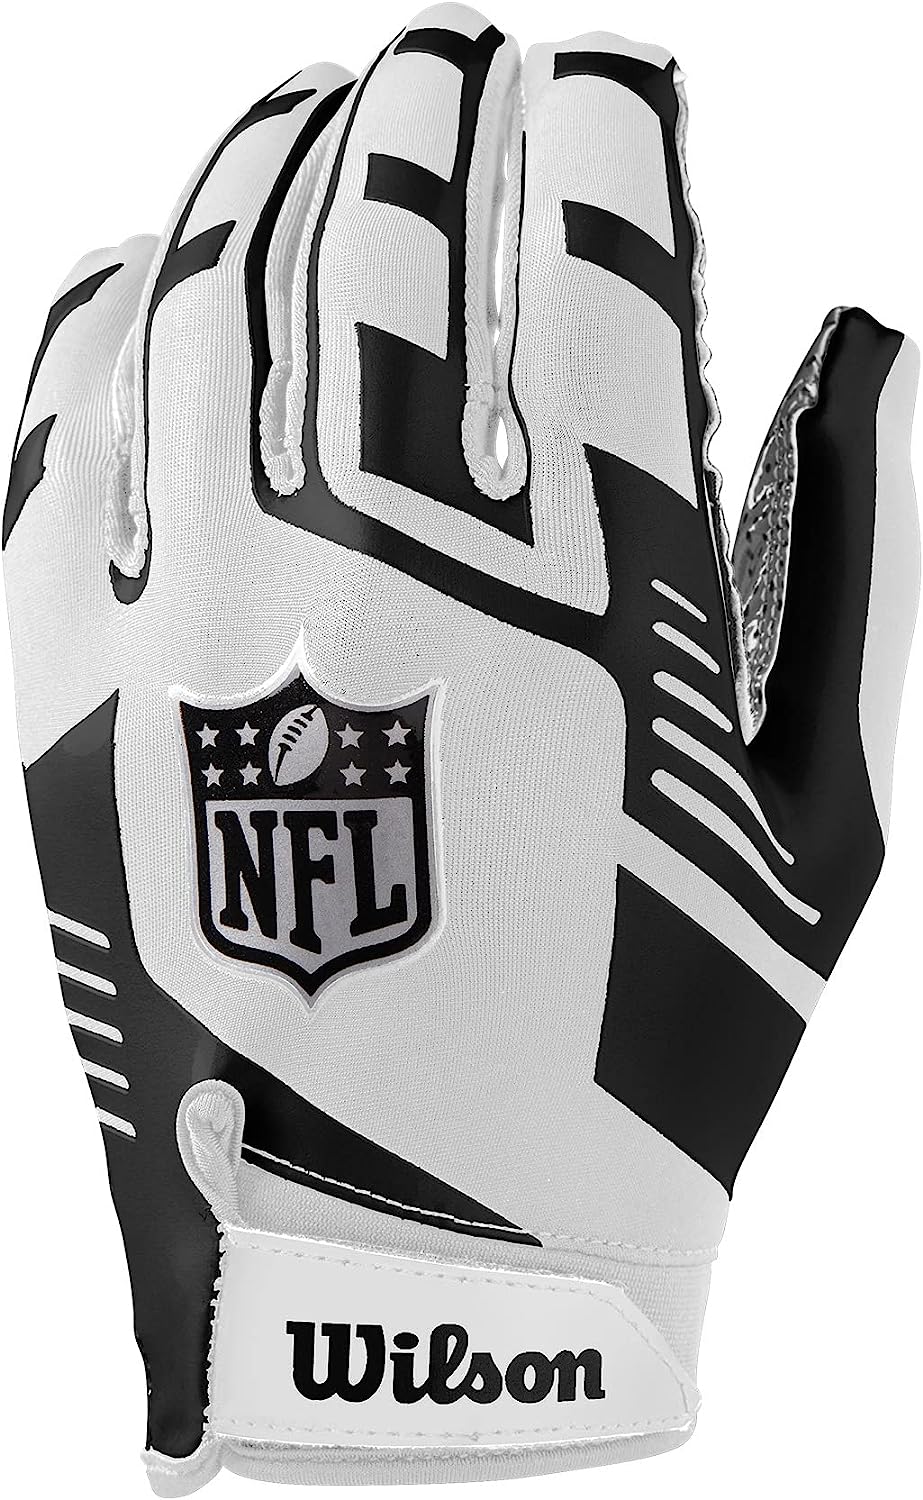 Wilson NFL Stretch Fit Receivers Glove - Adult Size, White/Black